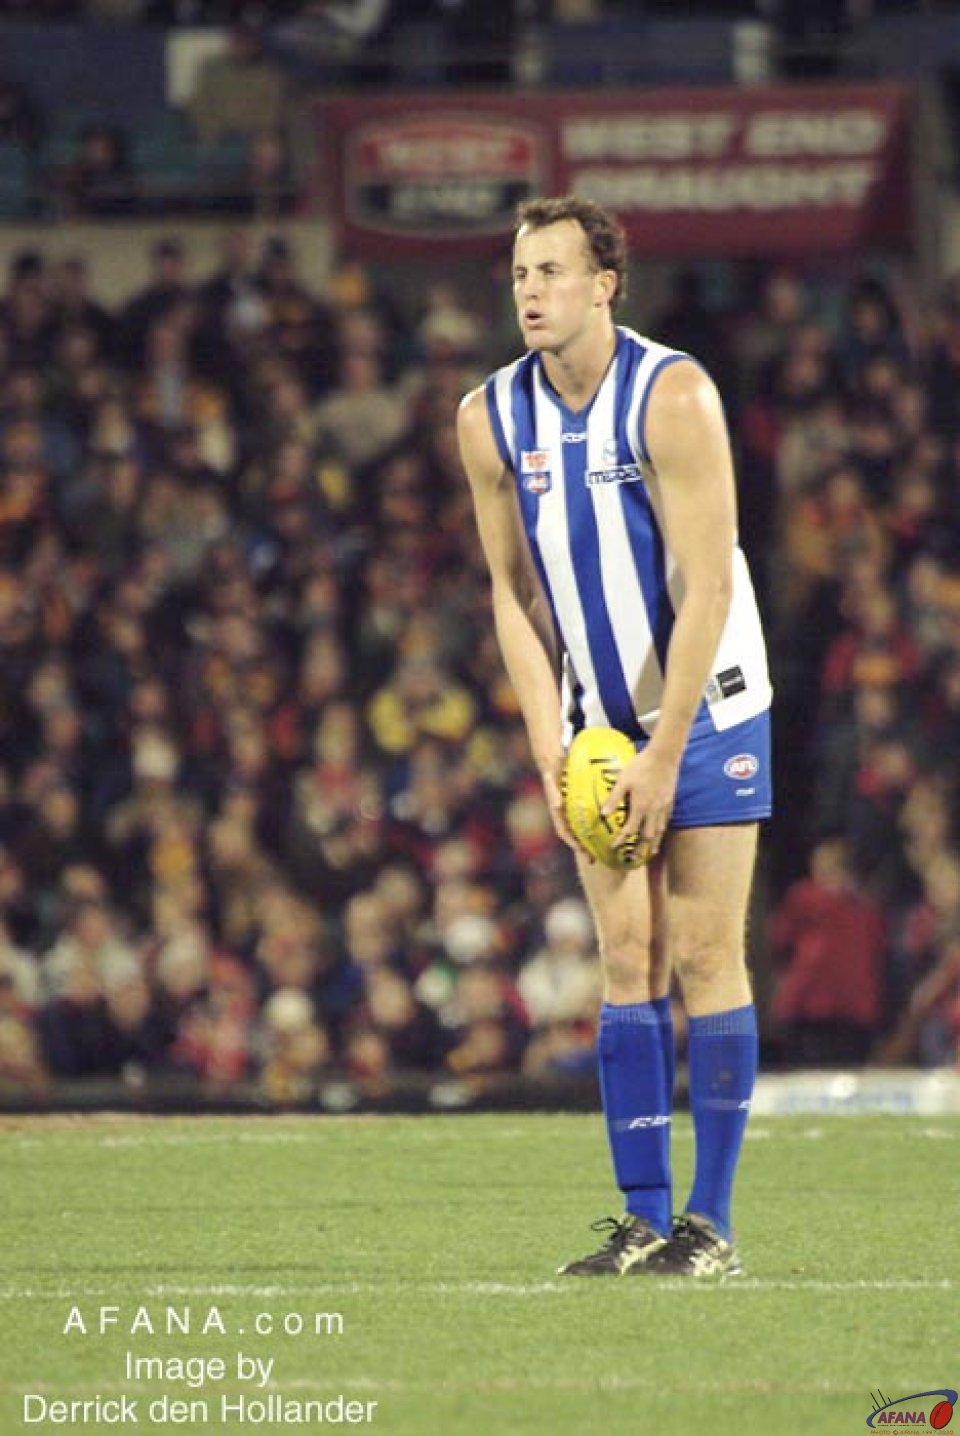 [b]North Melbourne about to drive long into attack at AAMI Stadium[/b]